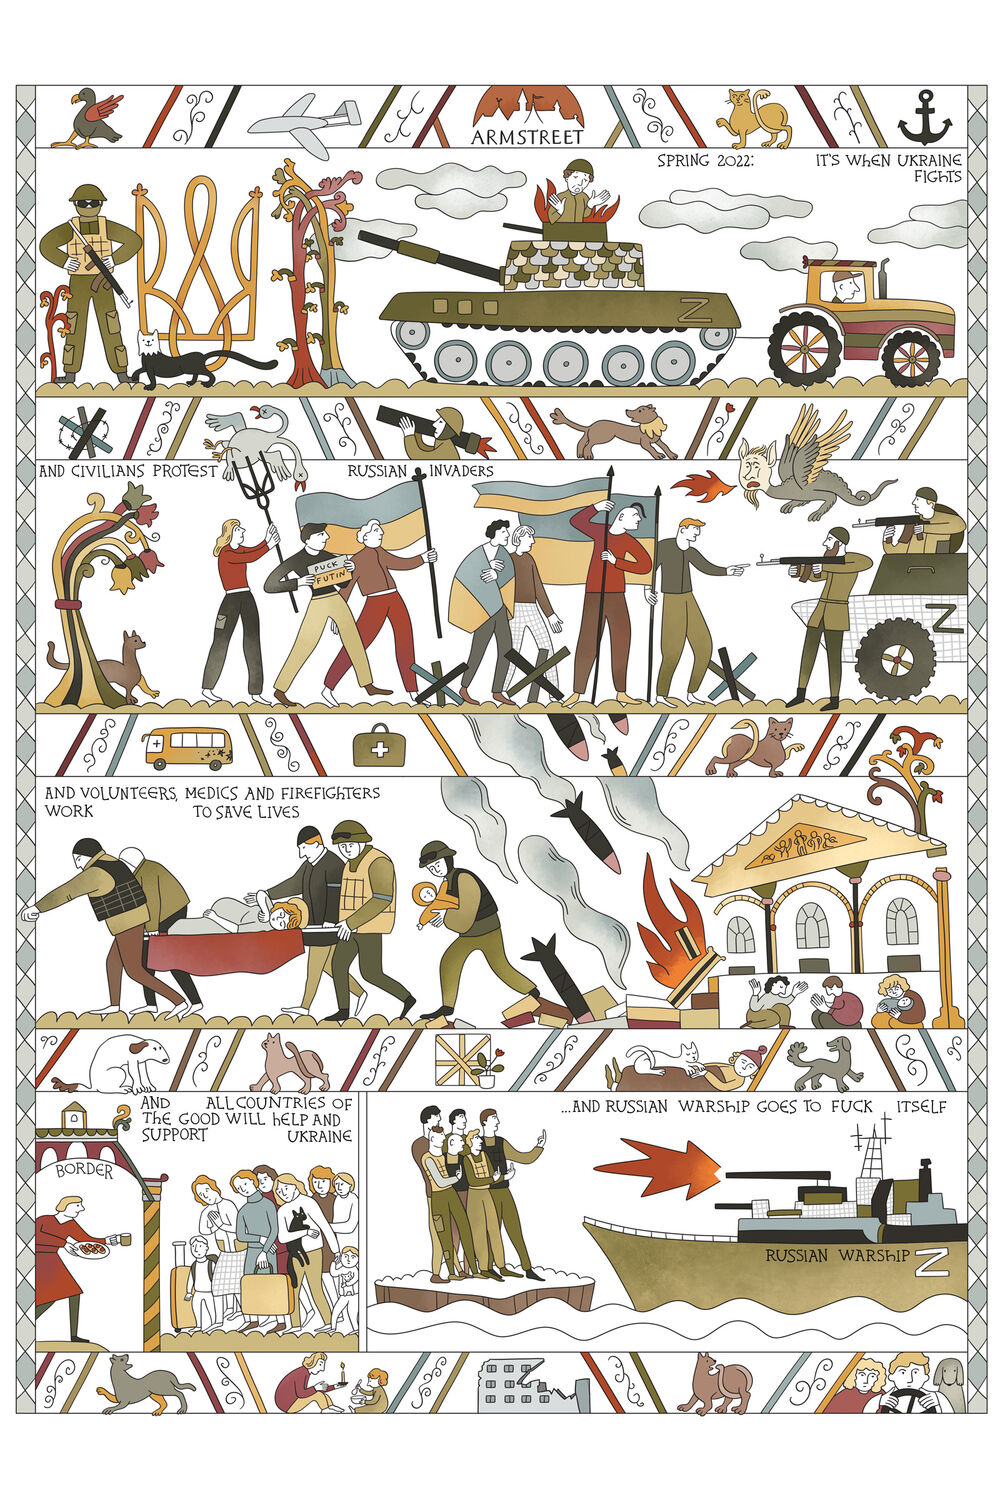 Bayeux tapestry-themed products to support Ukraine